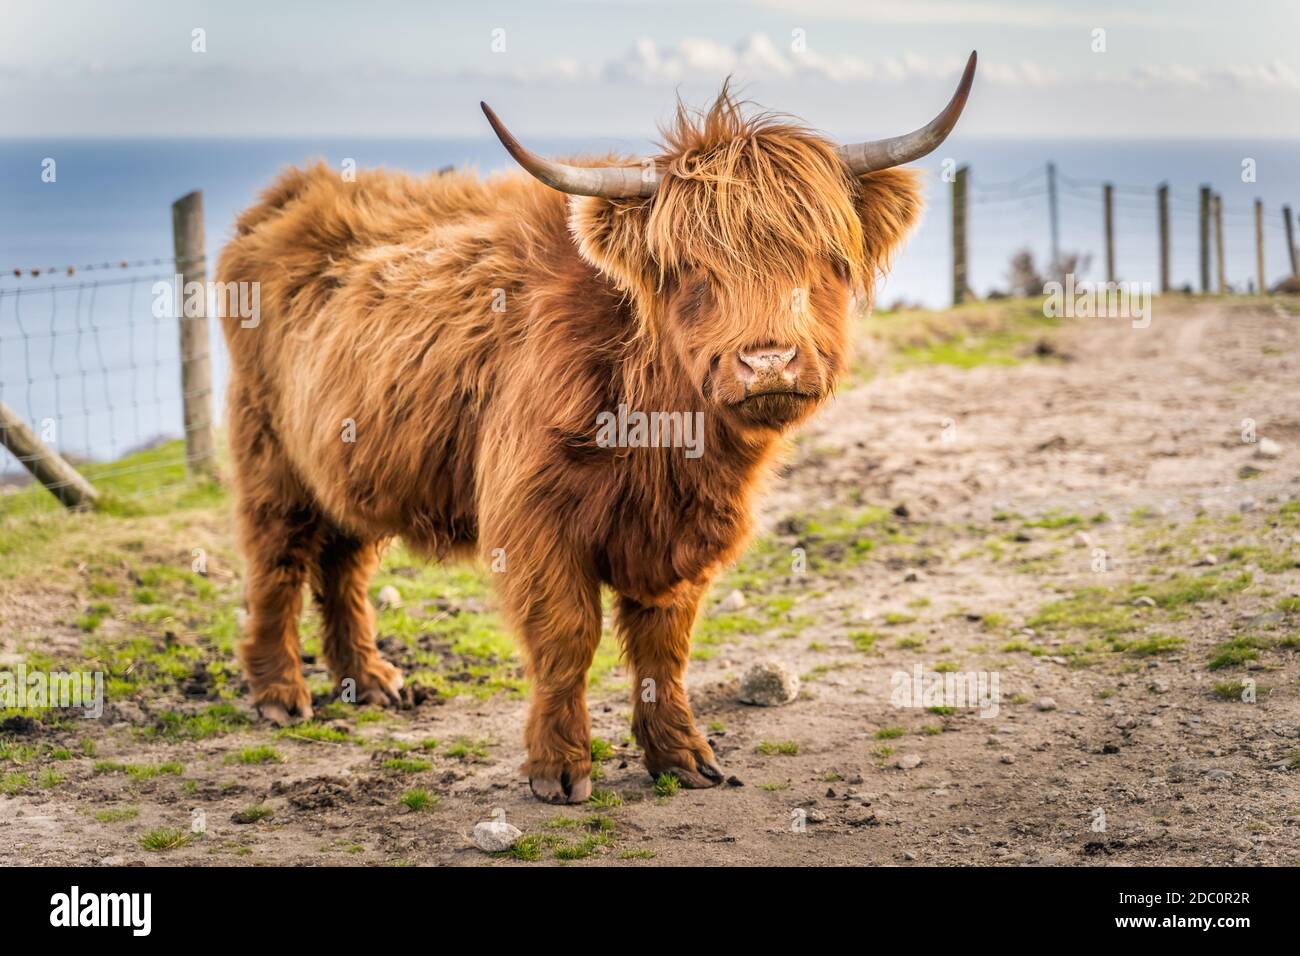 Beautiful, long furred or haired, ginger coloured Scottish Highland cattle on the hill of Slieve Donard in Mourn Mountains with Irish Sea in backgroun Stock Photo